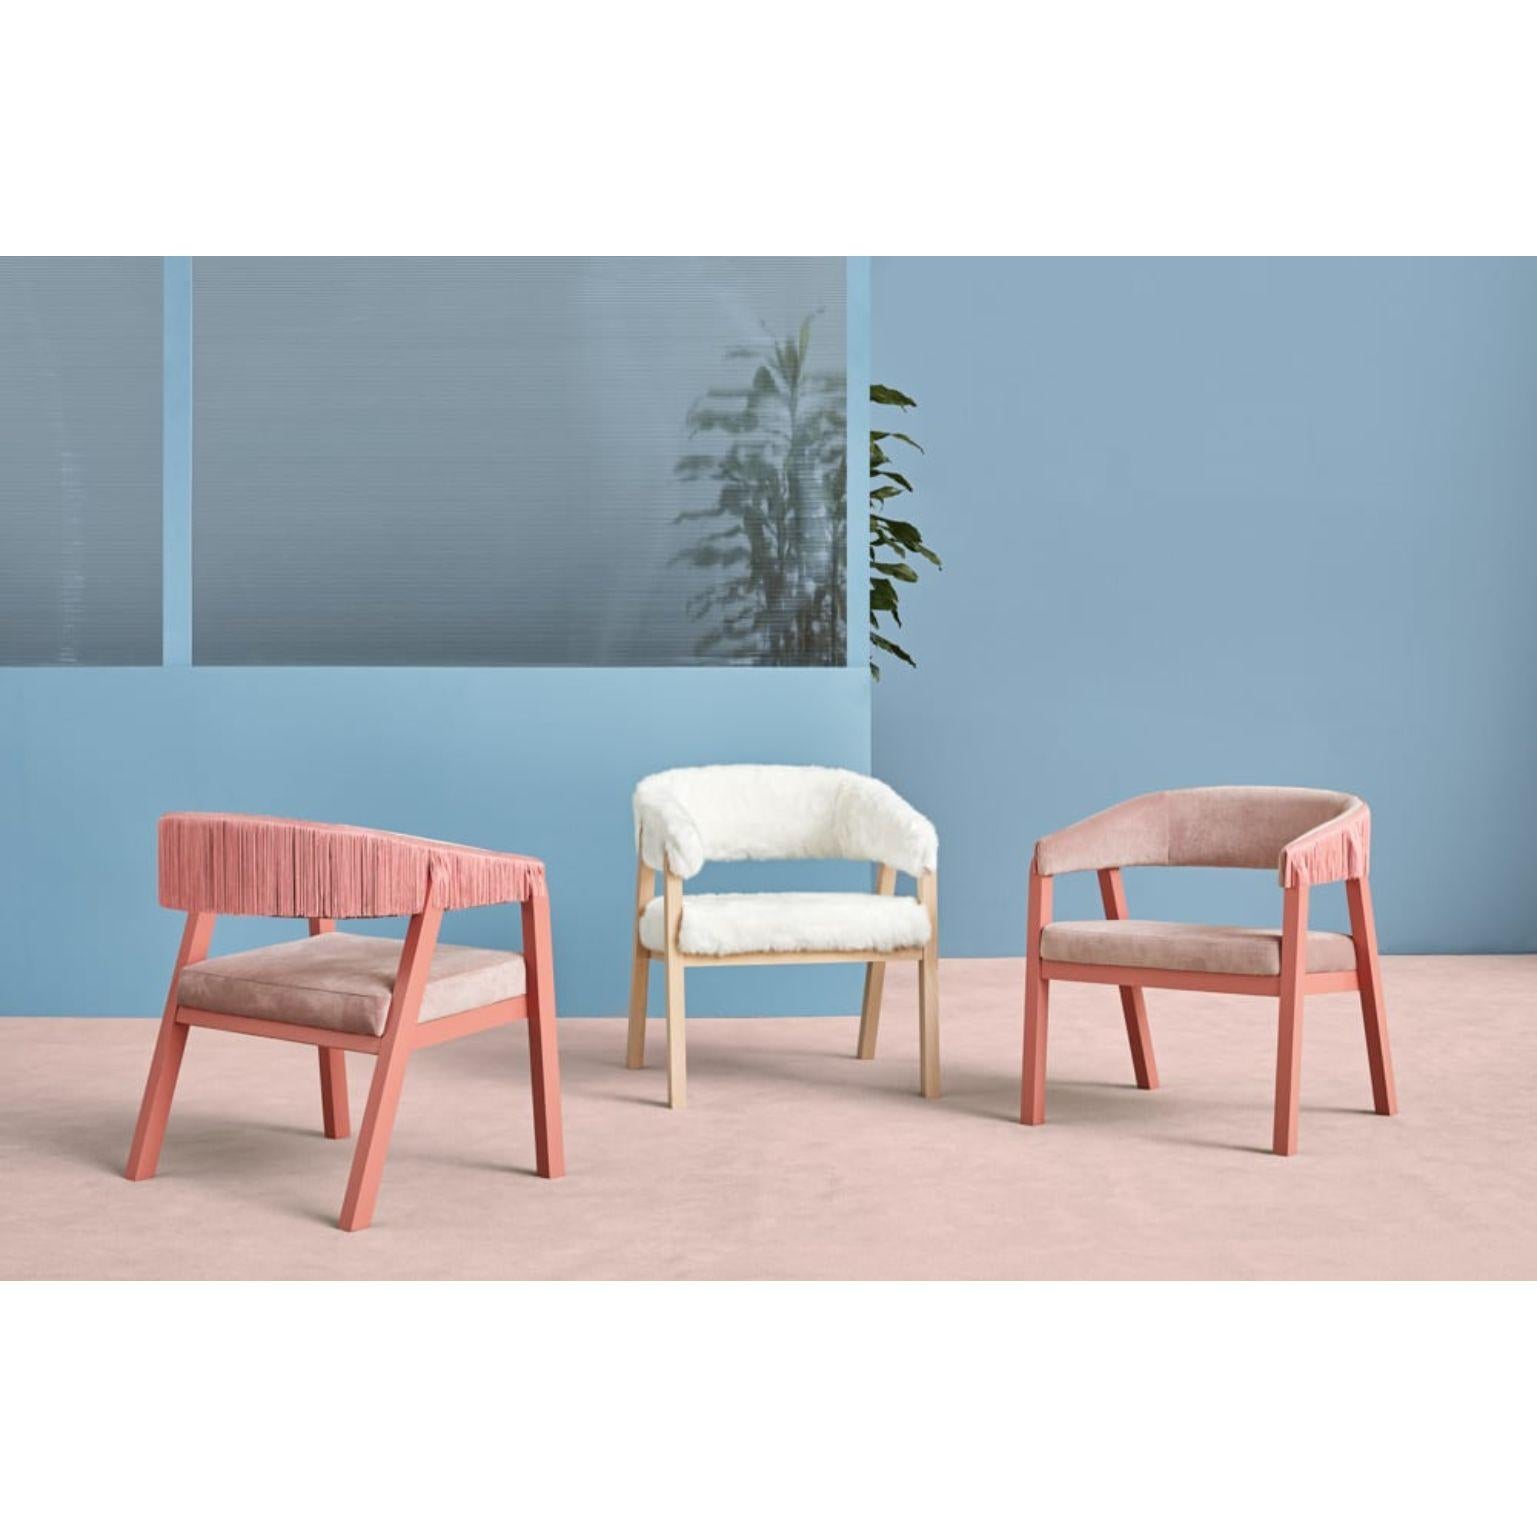 A Set of 3 Oslo armchairs - Arctic fox throw & pink by Pepe Albargues
Dimensions: W65, D60, H73, Seat 44
Materials: Beech wood structure.
Foam CMHR (high resilience and flame retardant) for all our cushion filling systems

Also available: